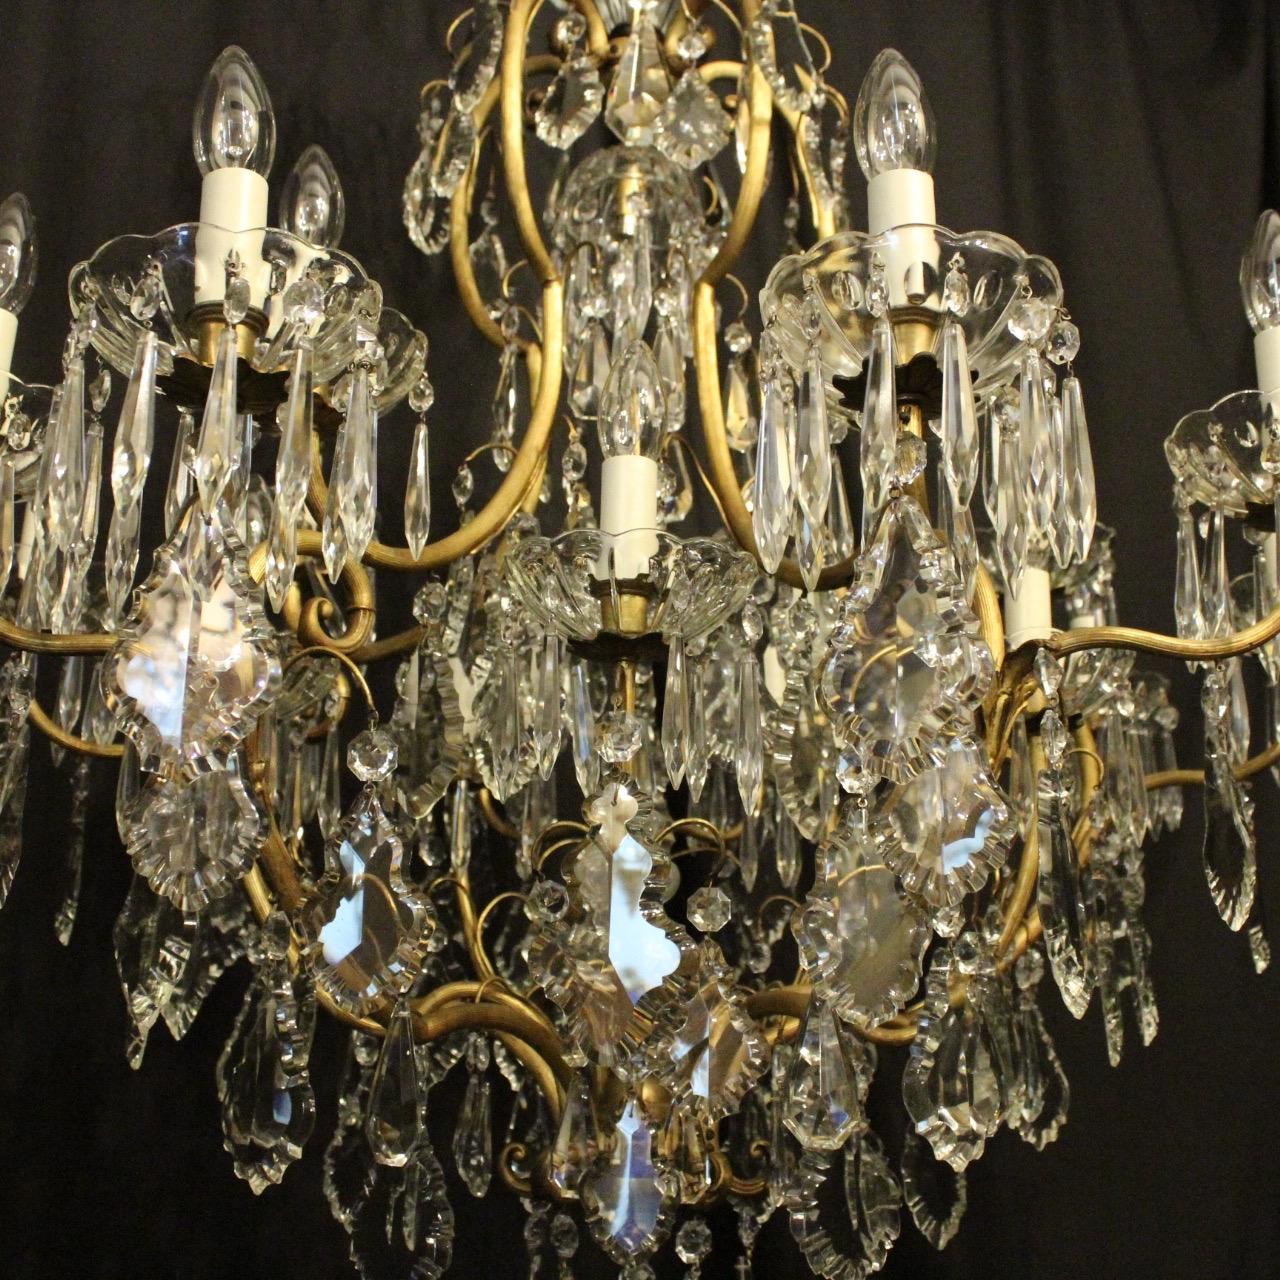 20th Century French Large Gilded and Crystal 21 Light Birdcage Antique Chandelier For Sale